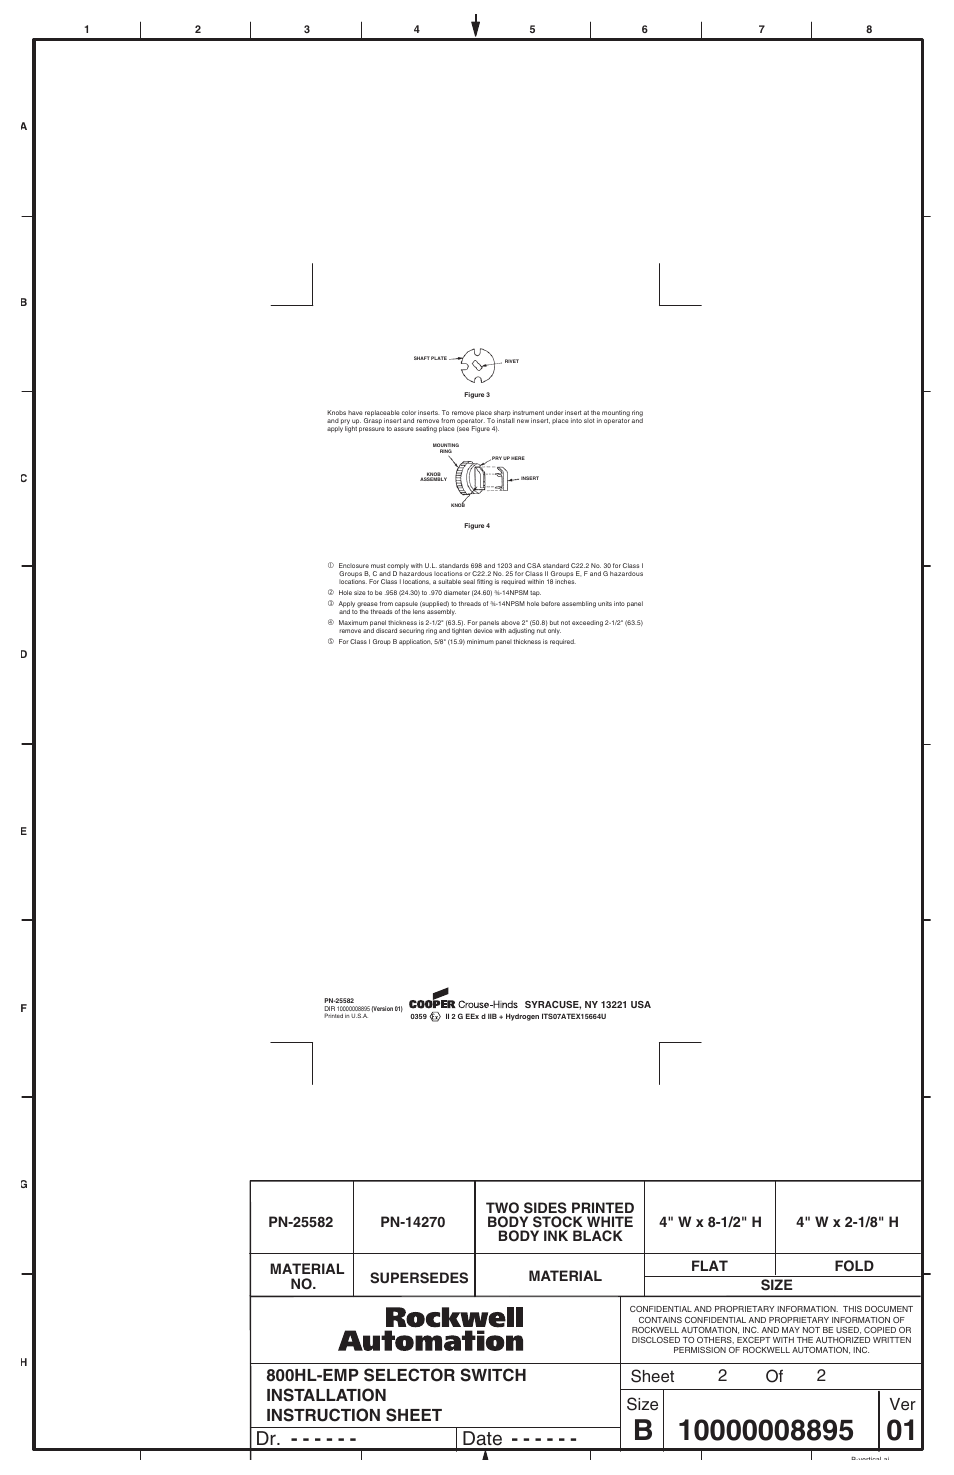 Dr. date, Sheet size ver of 2 2 | Rockwell Automation 800HL-EMP Selector Switches User Manual | Page 2 / 2